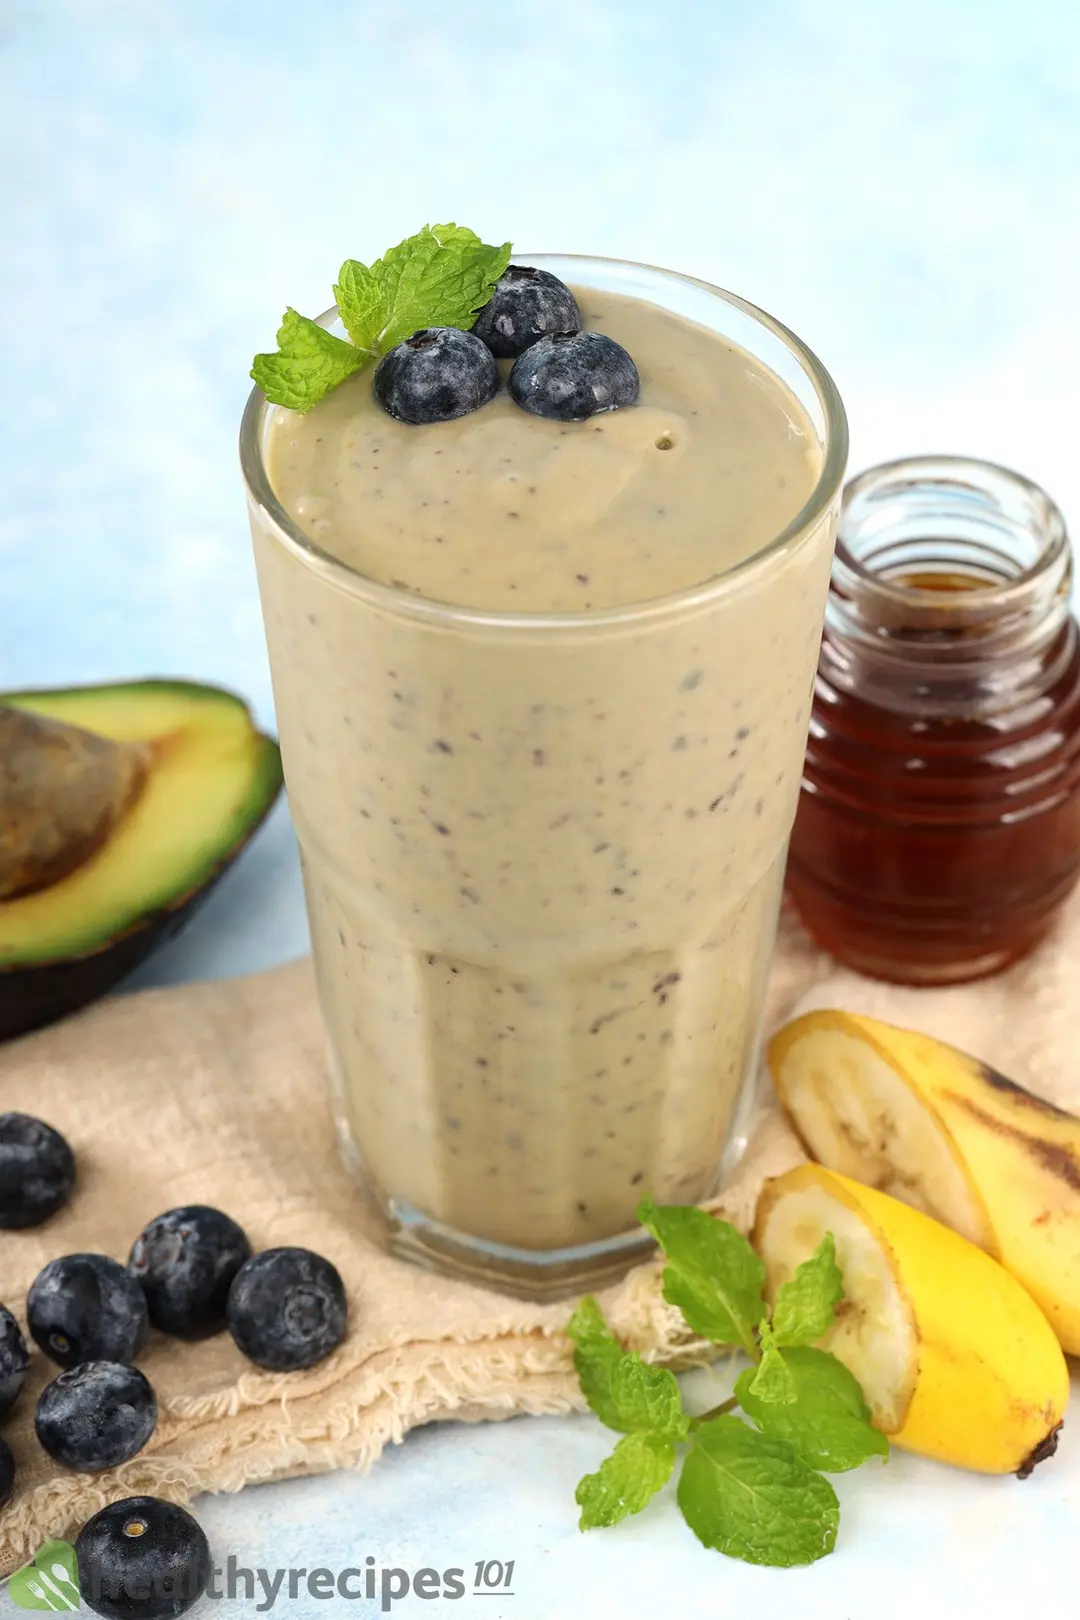 Blueberry Avocado Smoothie Recipe: A Delicious and Nourishing Drink